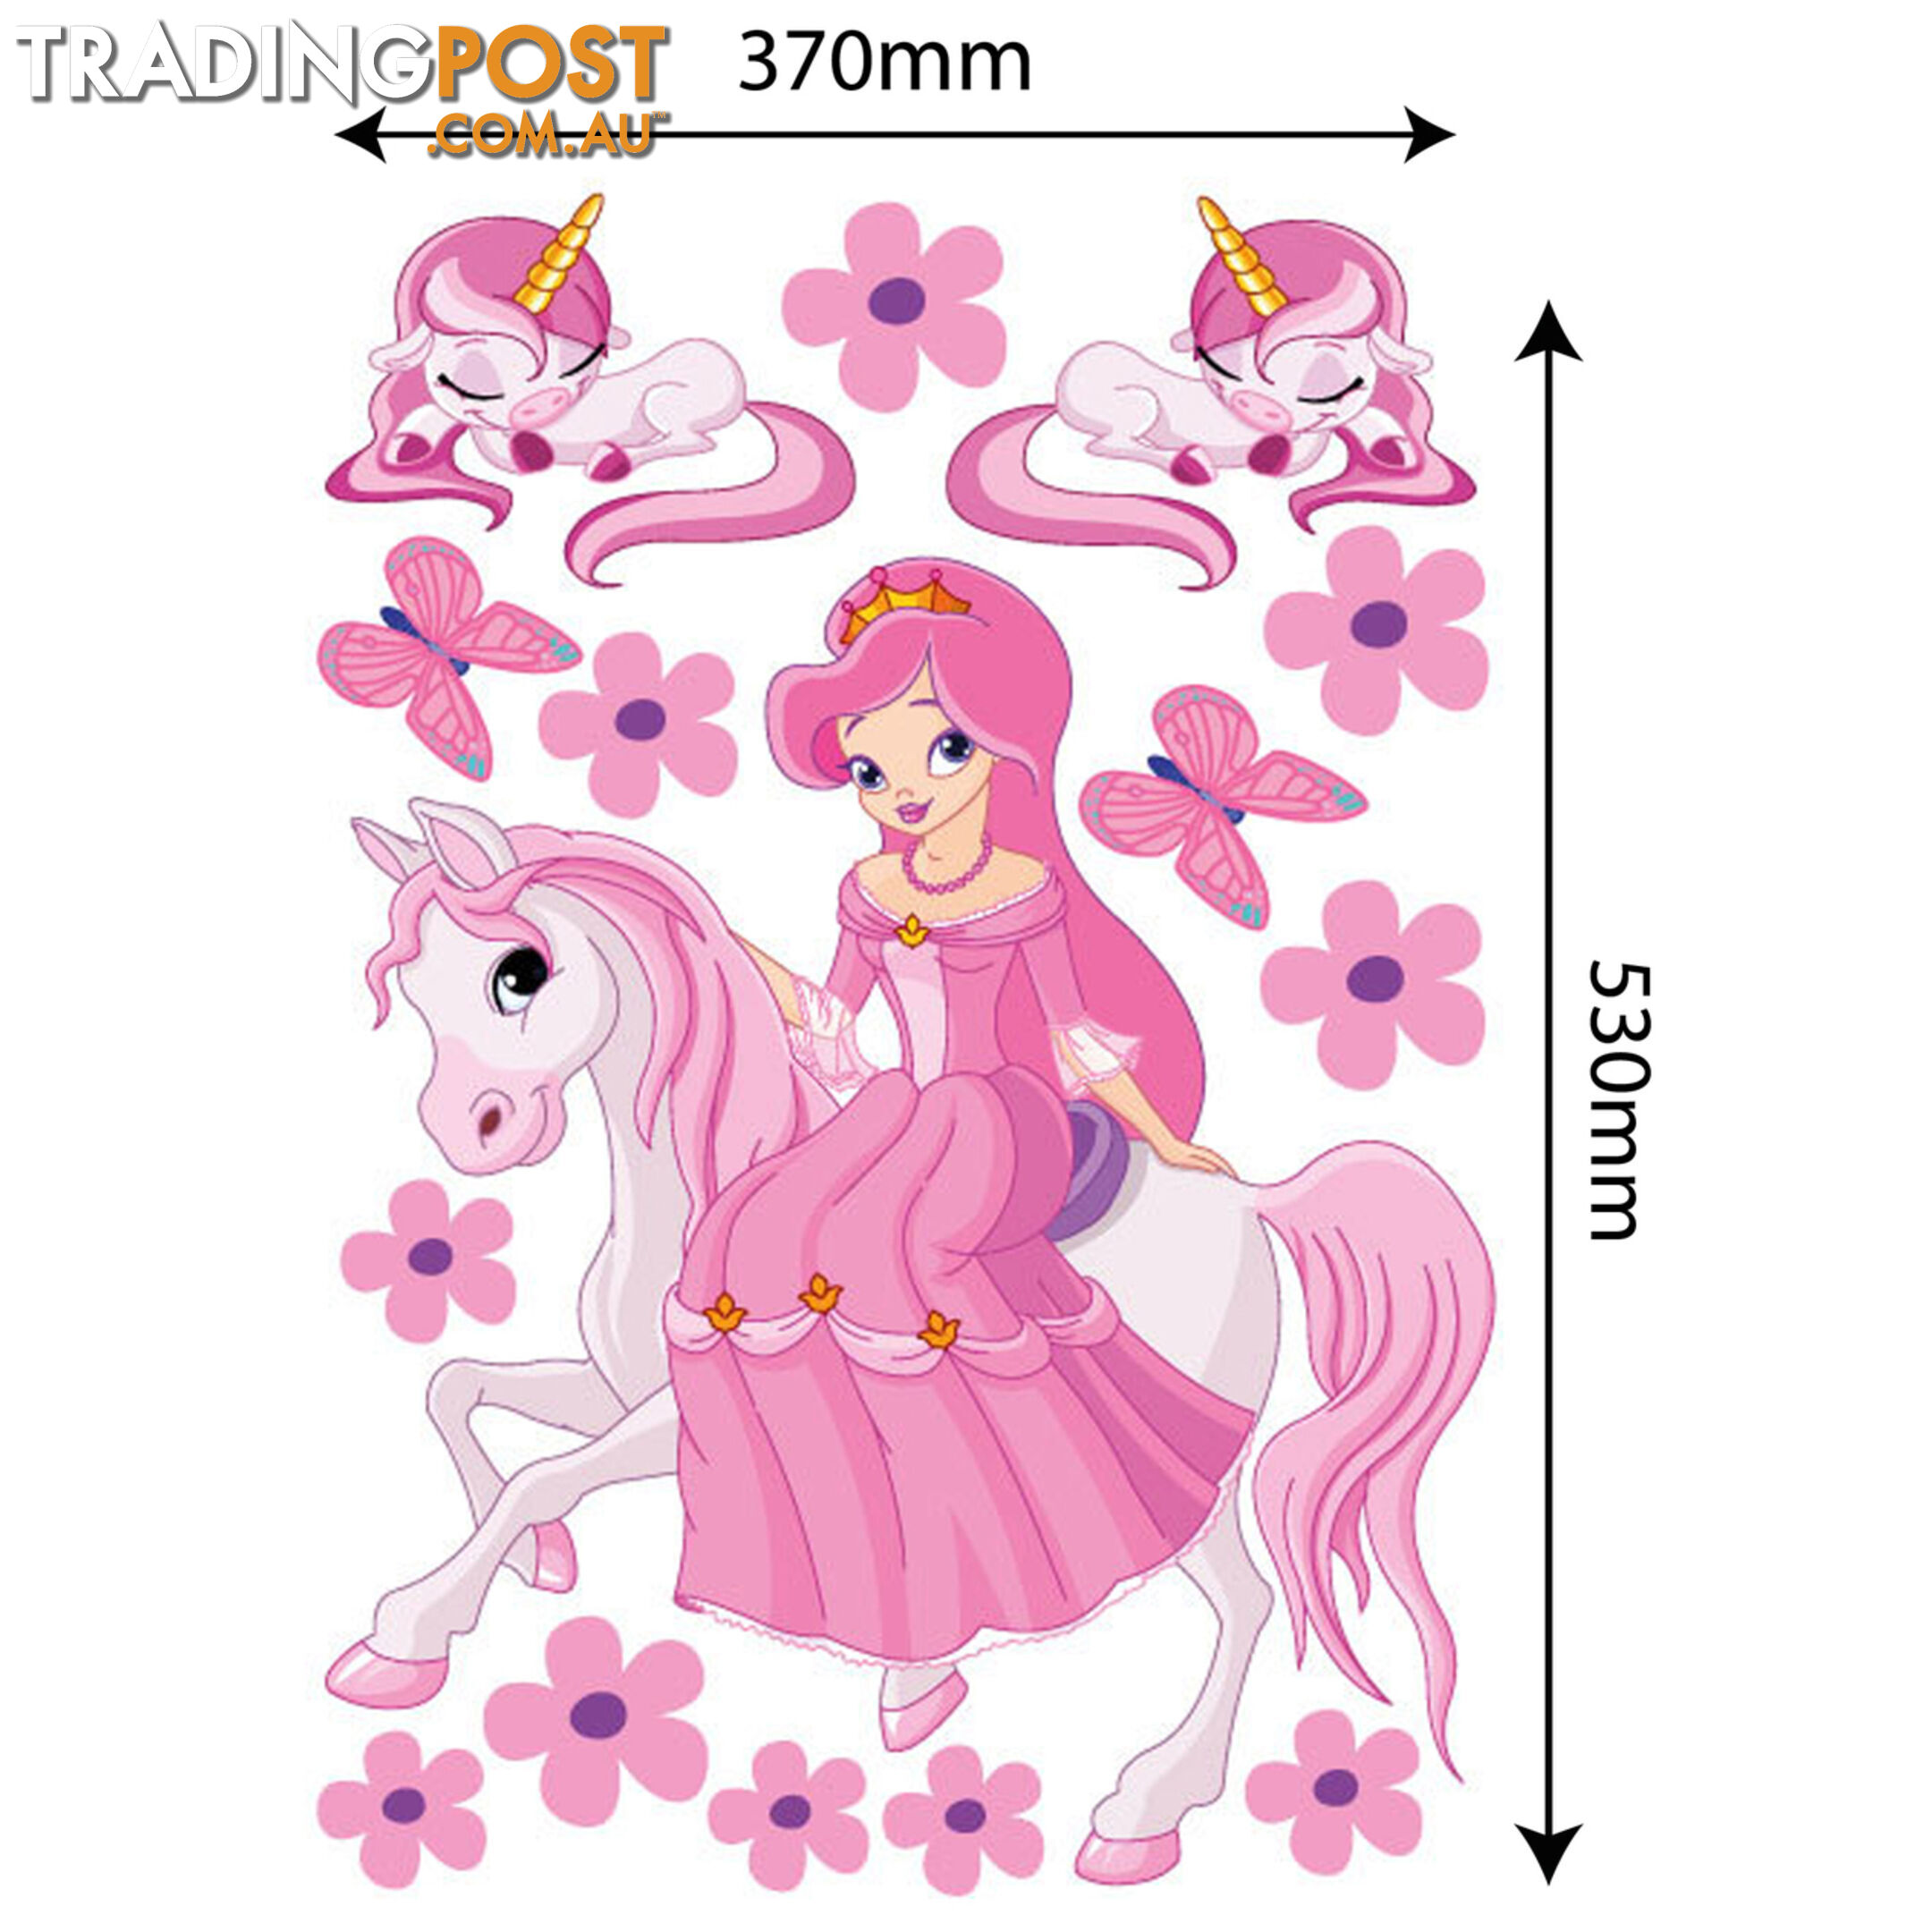 Large Size Princess on a horse with unicorns Wall Sticker - Totally Movable